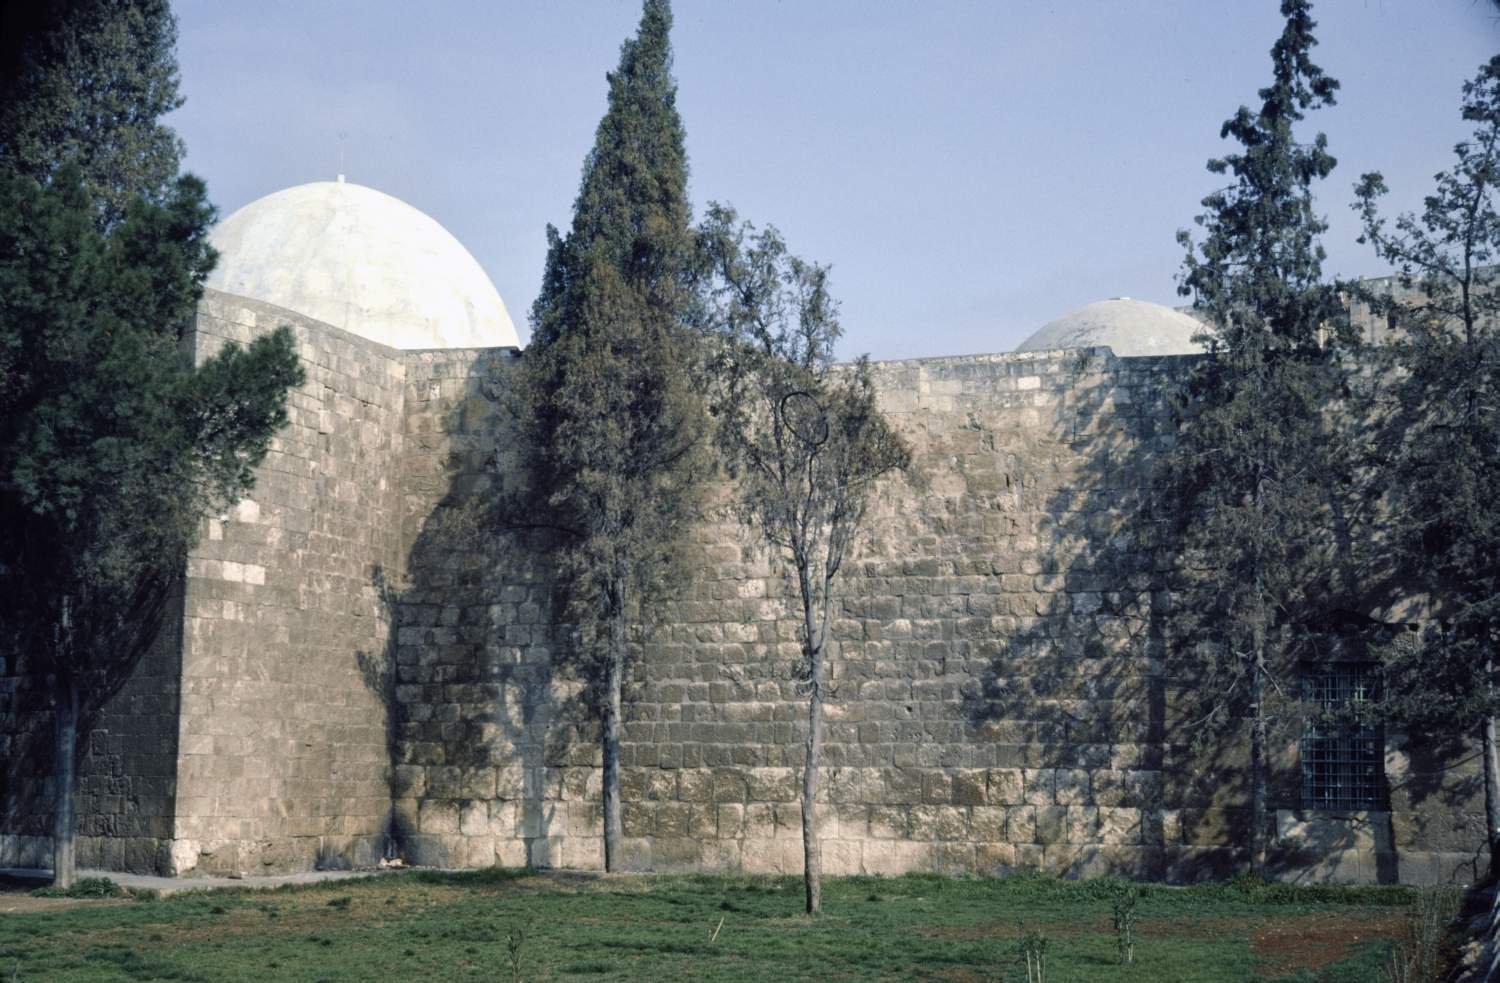 Exterior view of complex from south, showing domes over prayer hall (at left) and tomb chamber (at right).